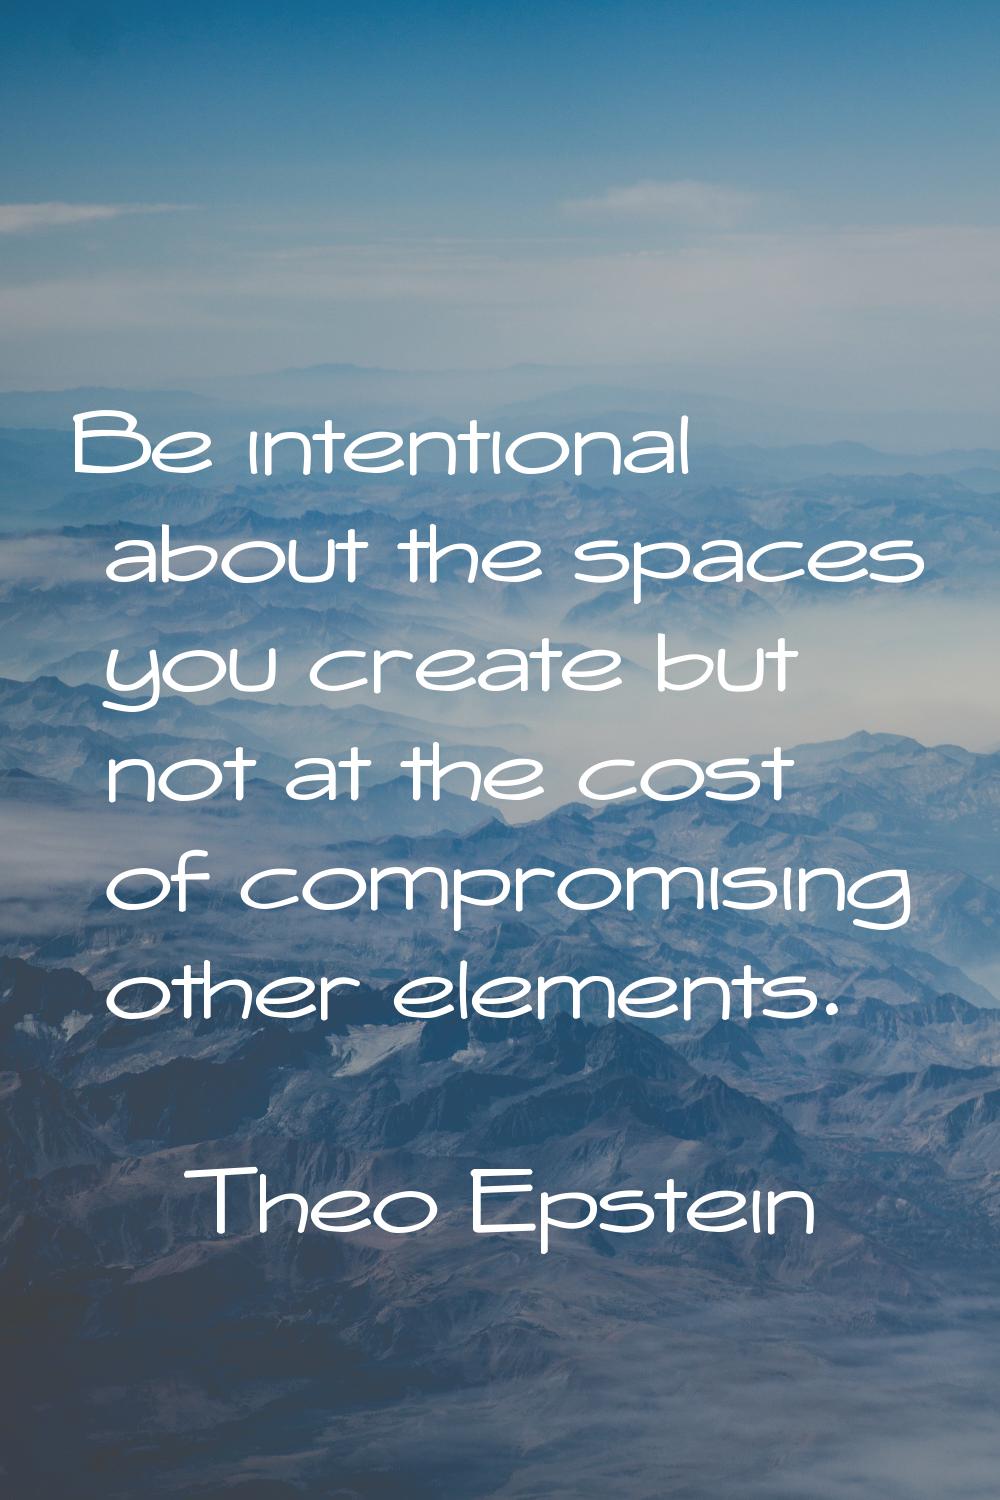 Be intentional about the spaces you create but not at the cost of compromising other elements.